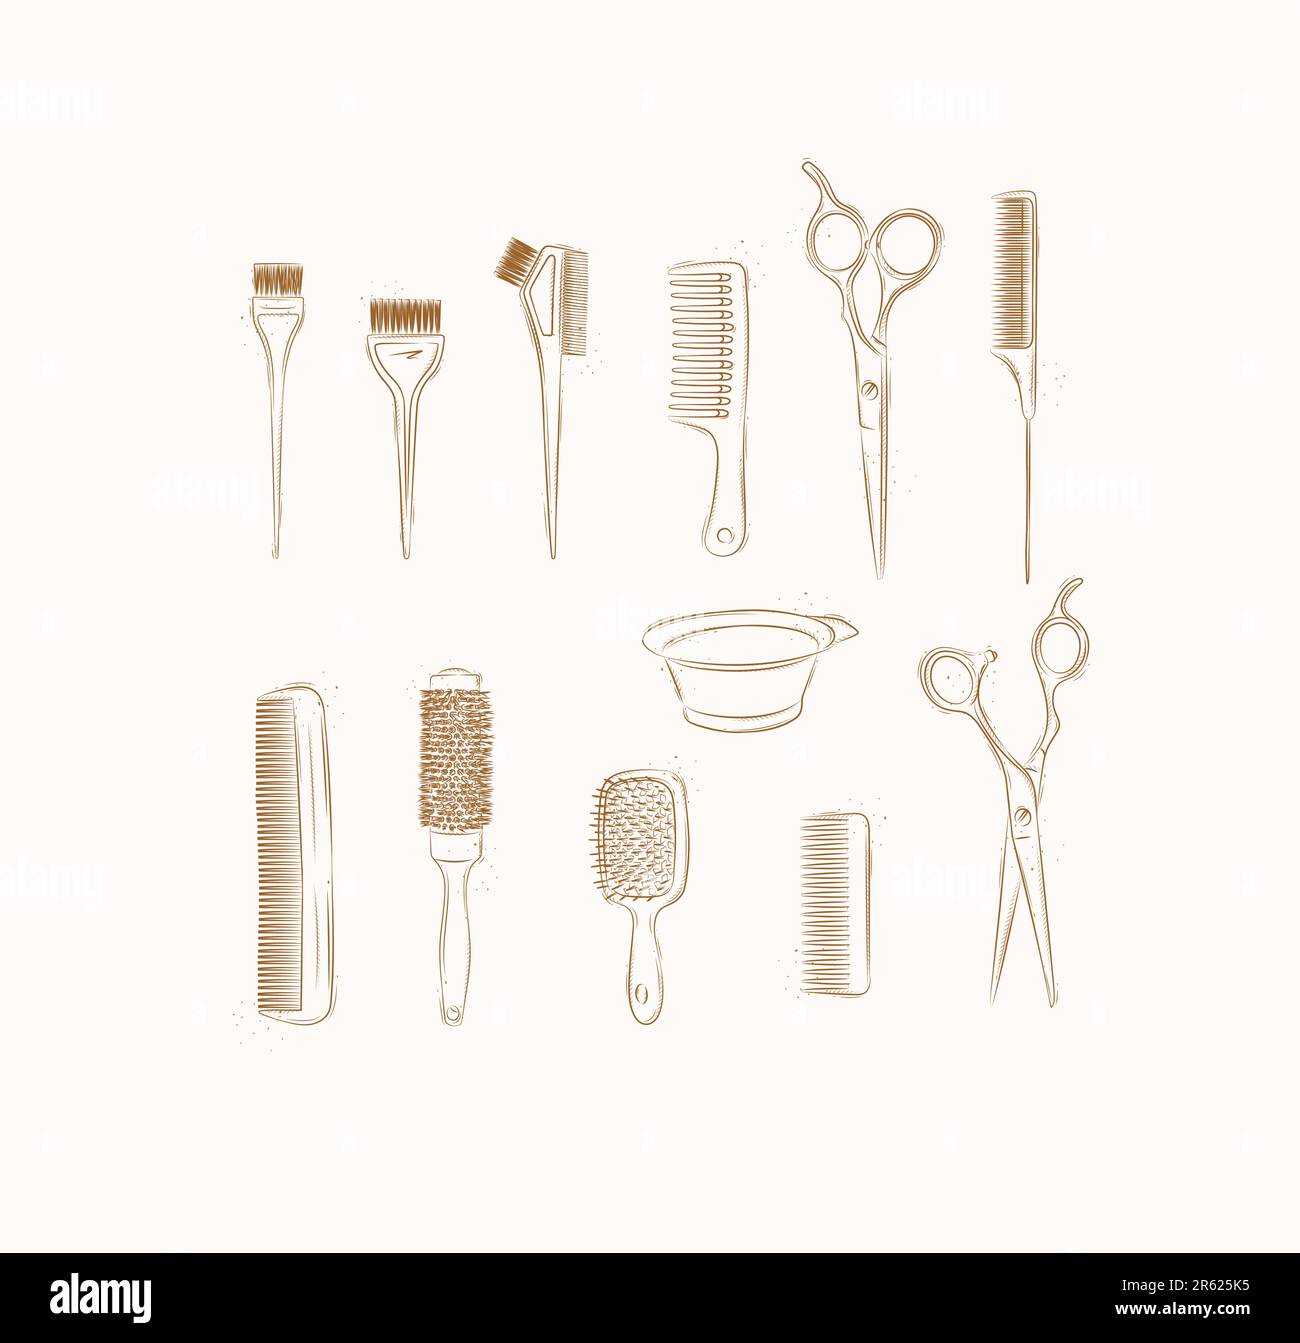 Hairdresser comb types and hair dye brushes collection drawing on brown background Stock Vector